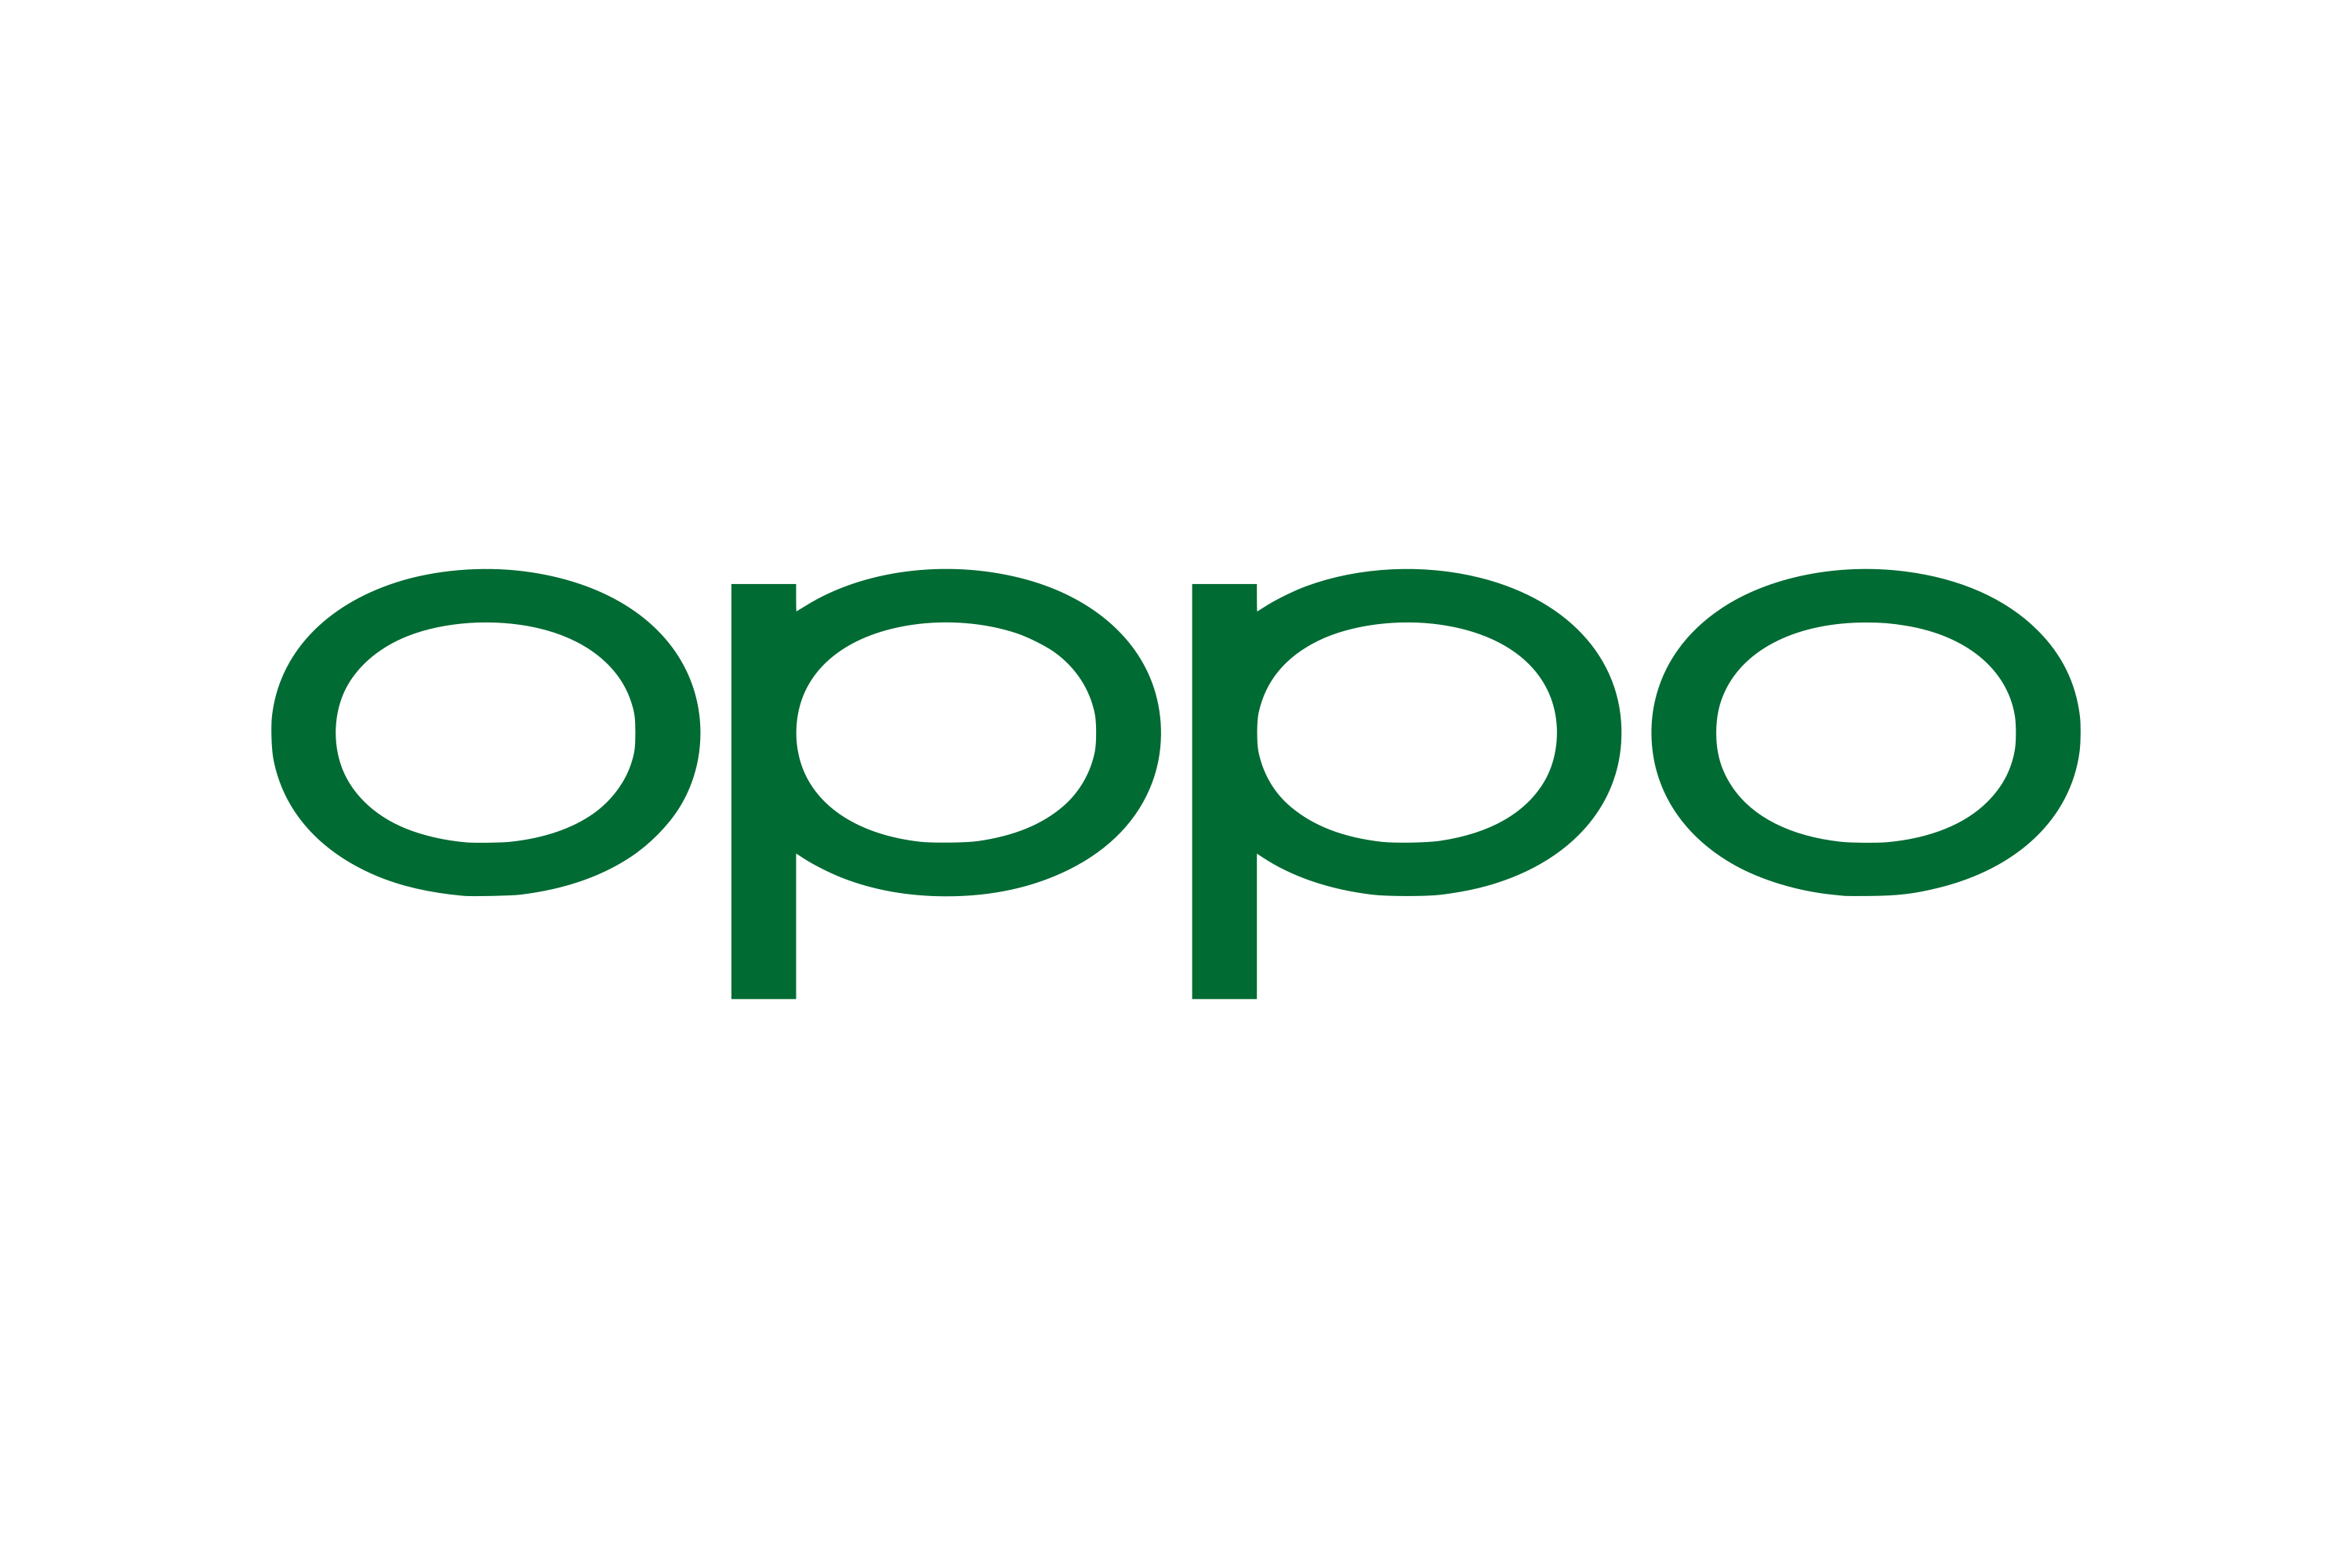 Oppo Logo Png Download - 1600